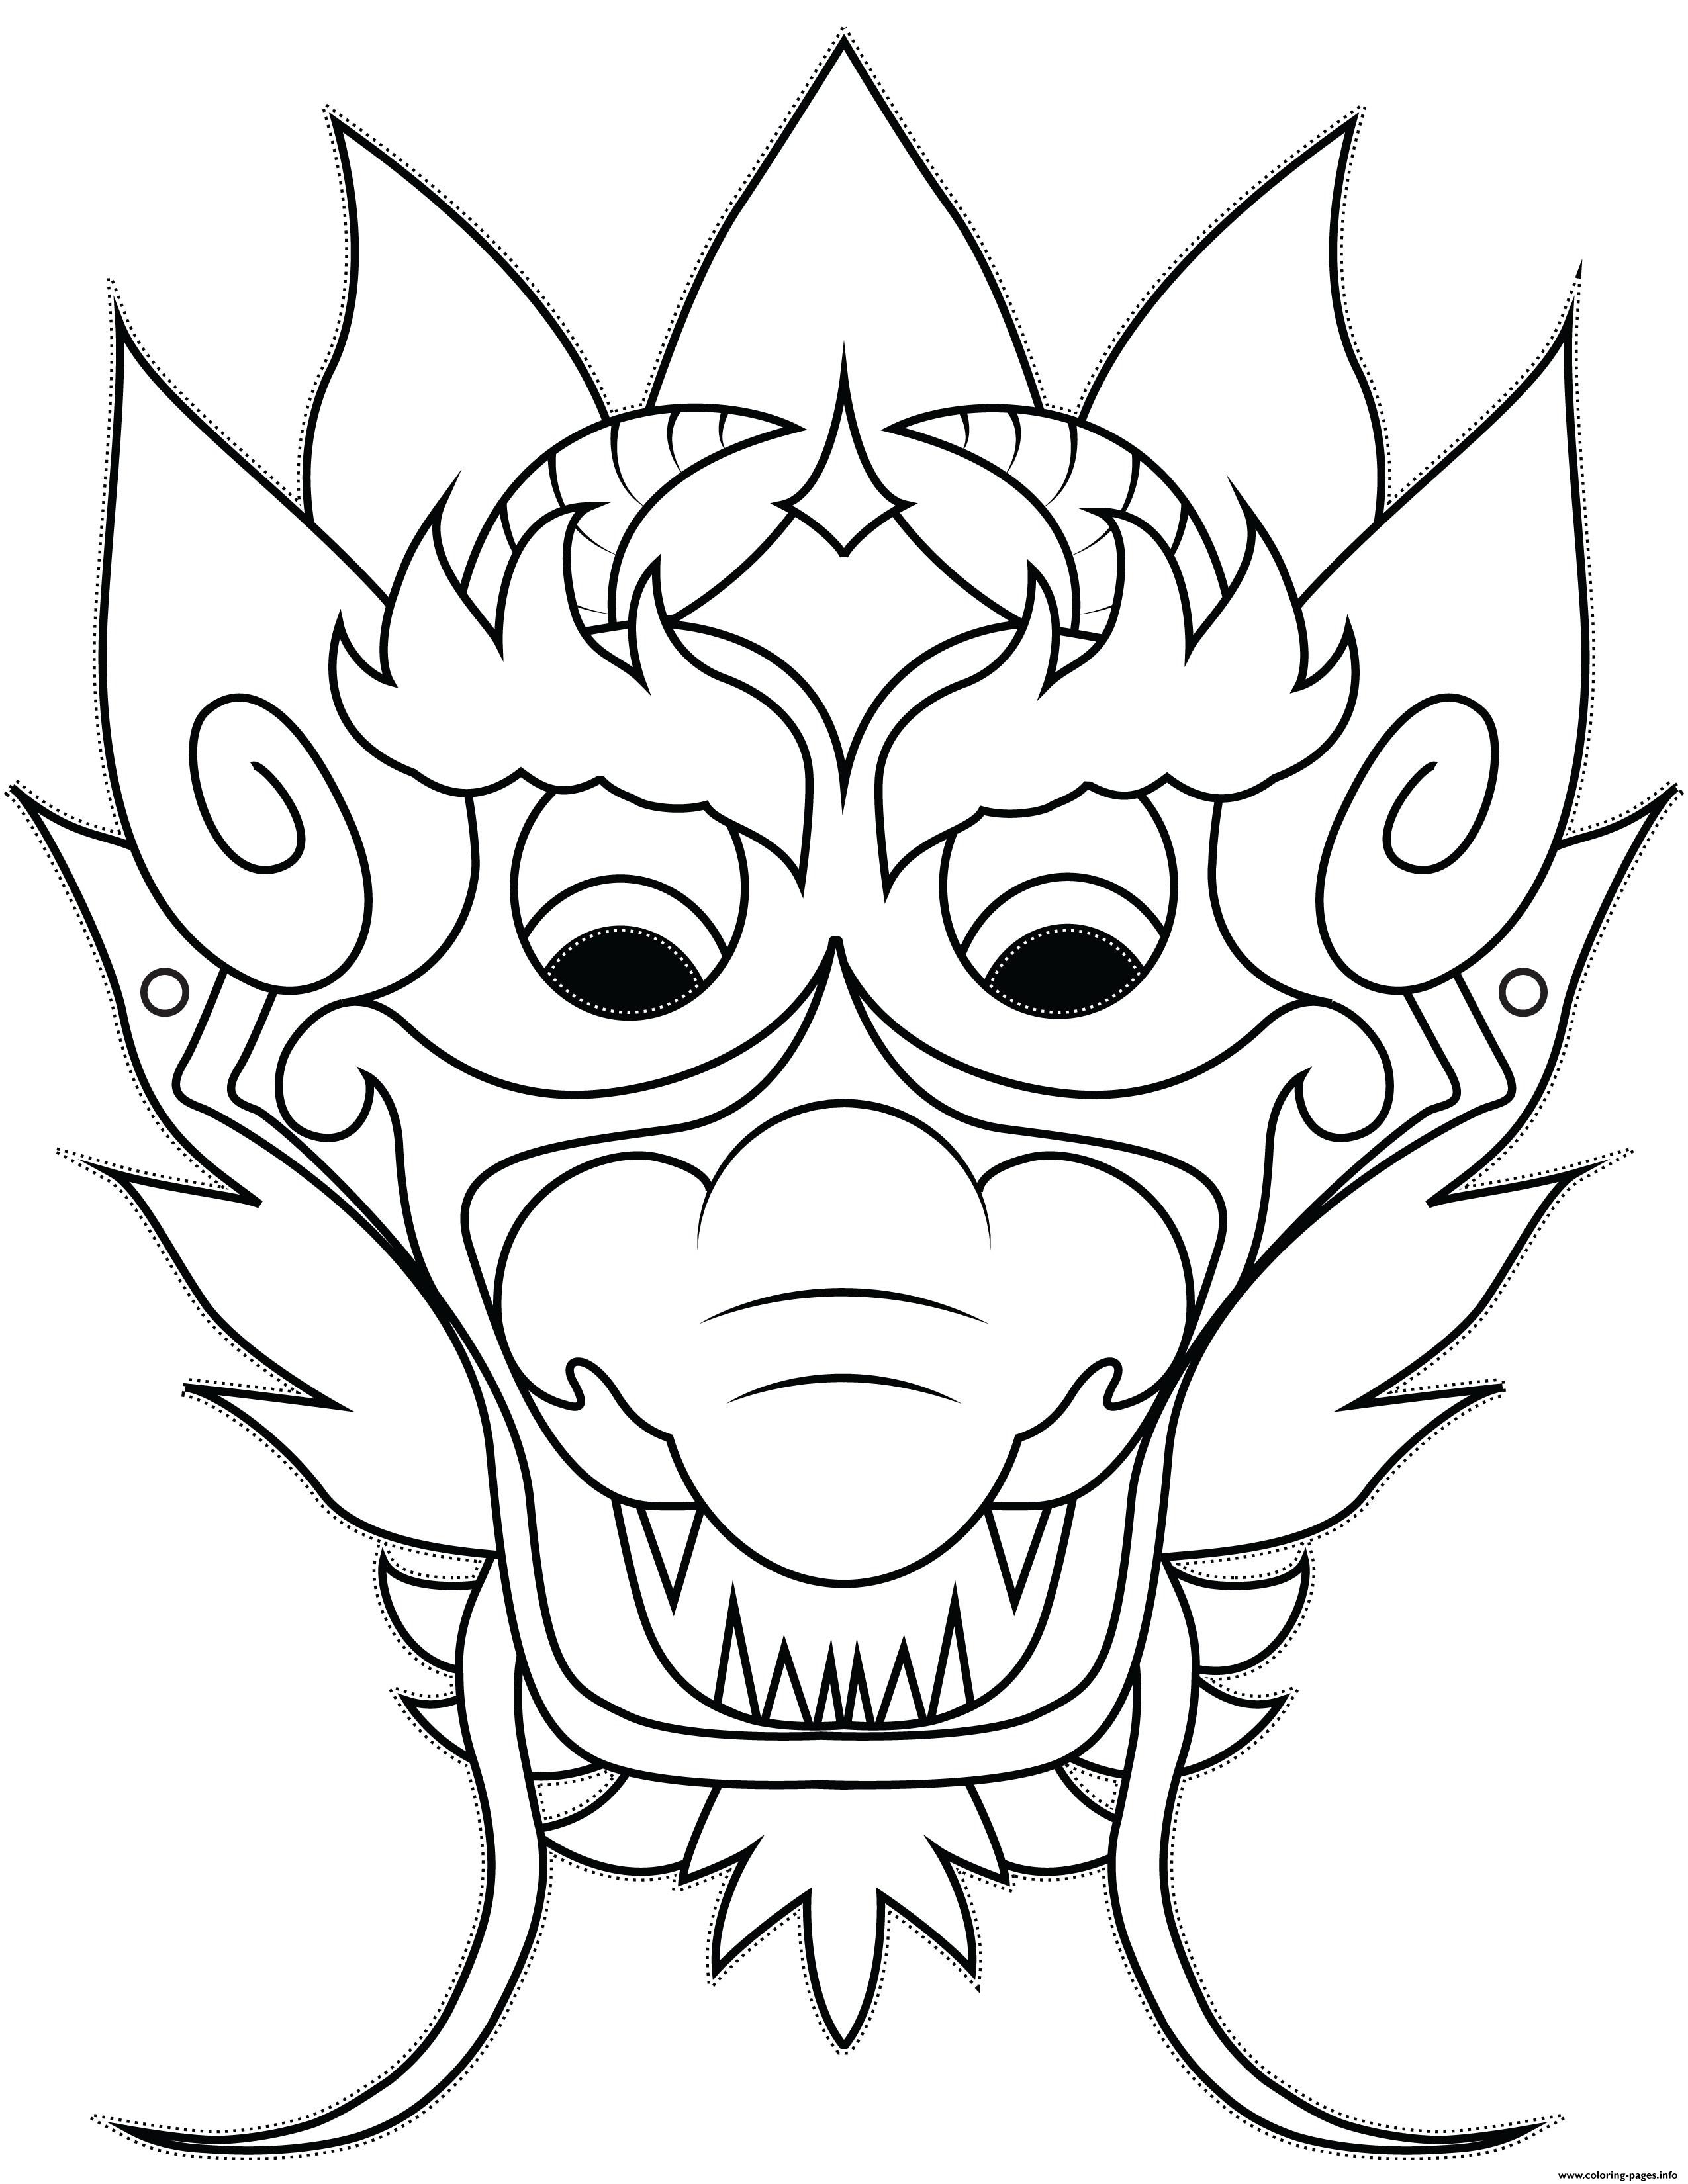 Download 2018 Chinese New Year Mask Dragon Coloring Pages Printable